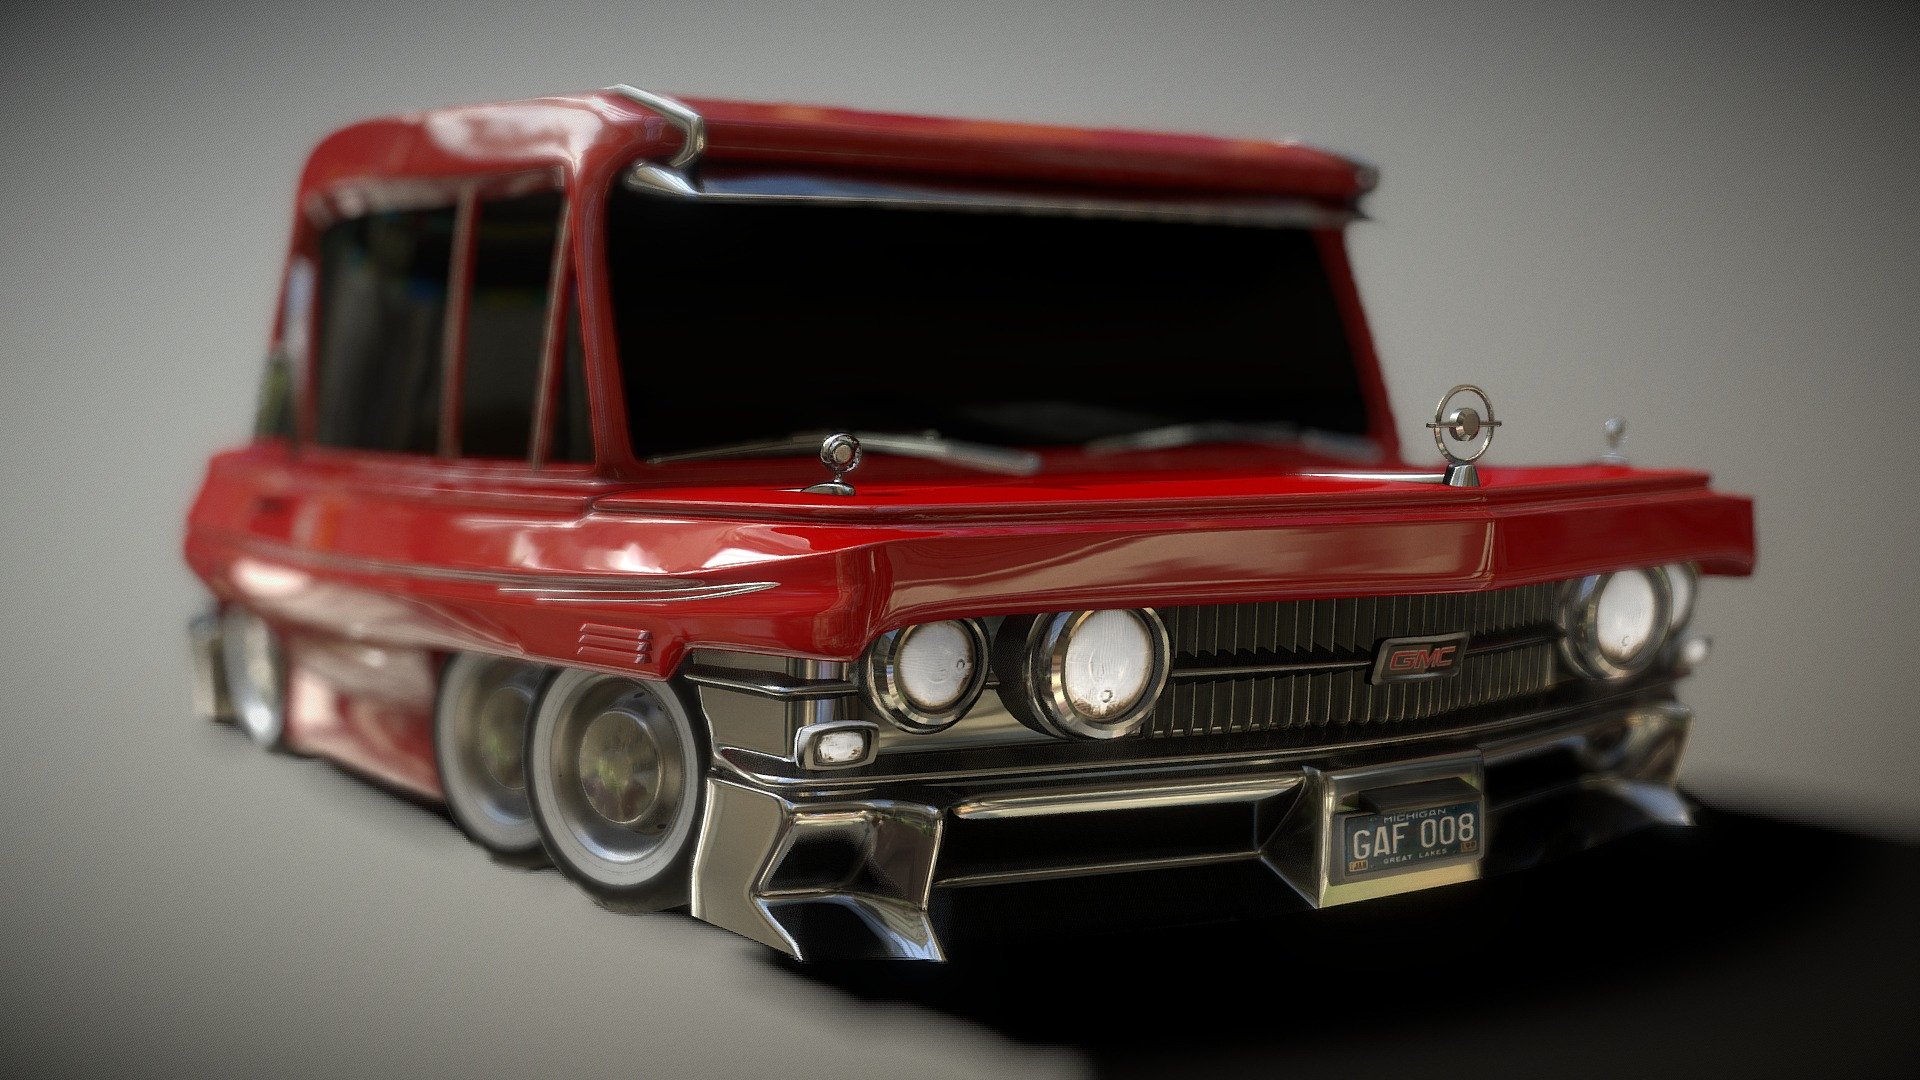 Making a car in blender is hard and this summer i learnt it and made this vintage old looking car with some caricature element to it

Check out my renders in artstation: https://www.artstation.com/artwork/wJ5od6
linktr.ee/DEDROX2K - vintage-wagon cartoon car - Download Free 3D model by DEDROX (@Raghavprasanna) 3d model